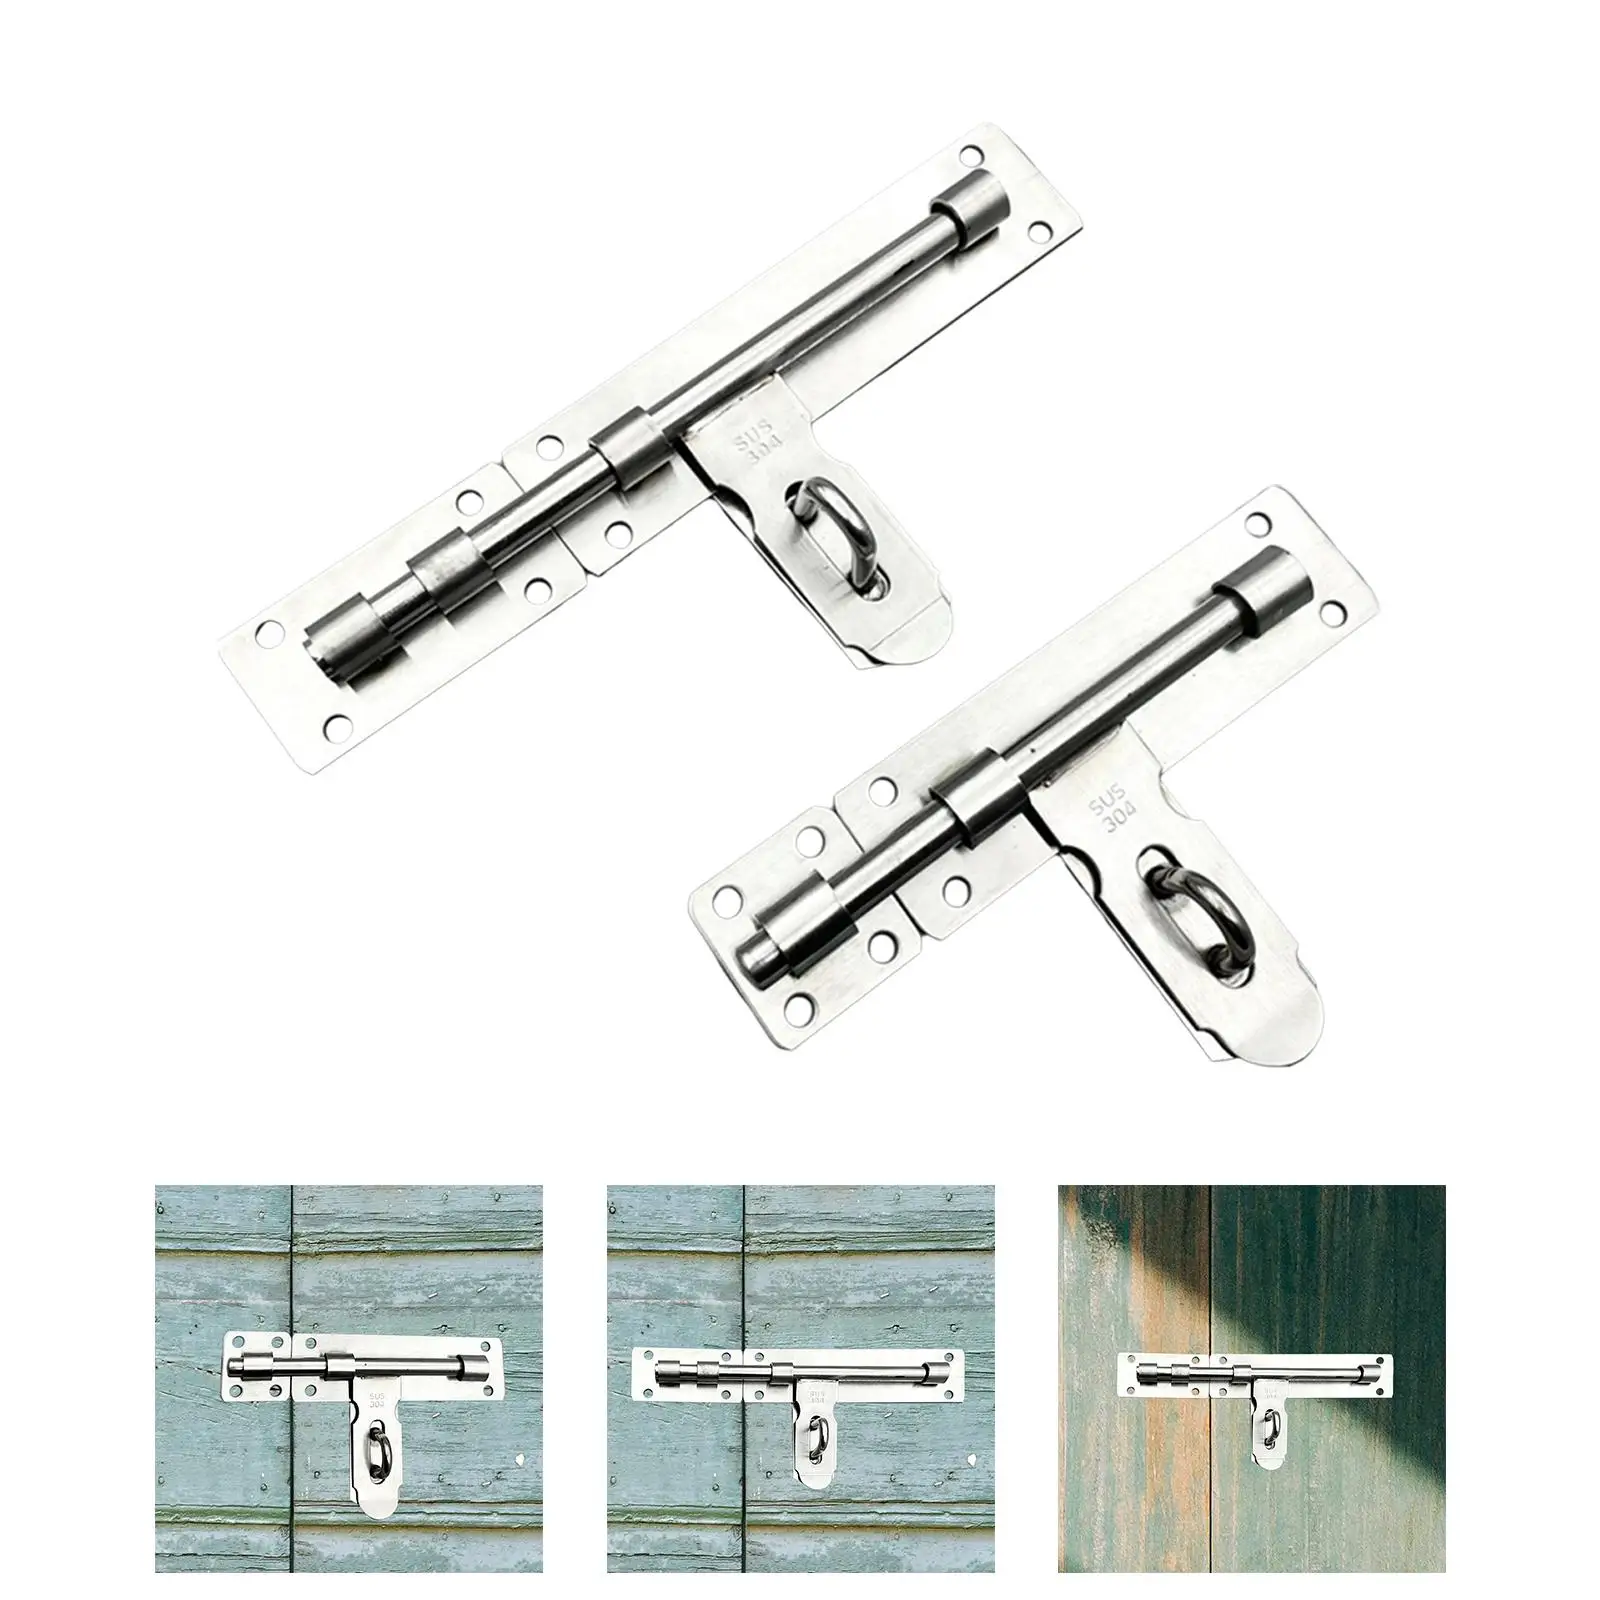 4x Door Security Bolt Latch Slide Latch Lock for Dormitory Household Office